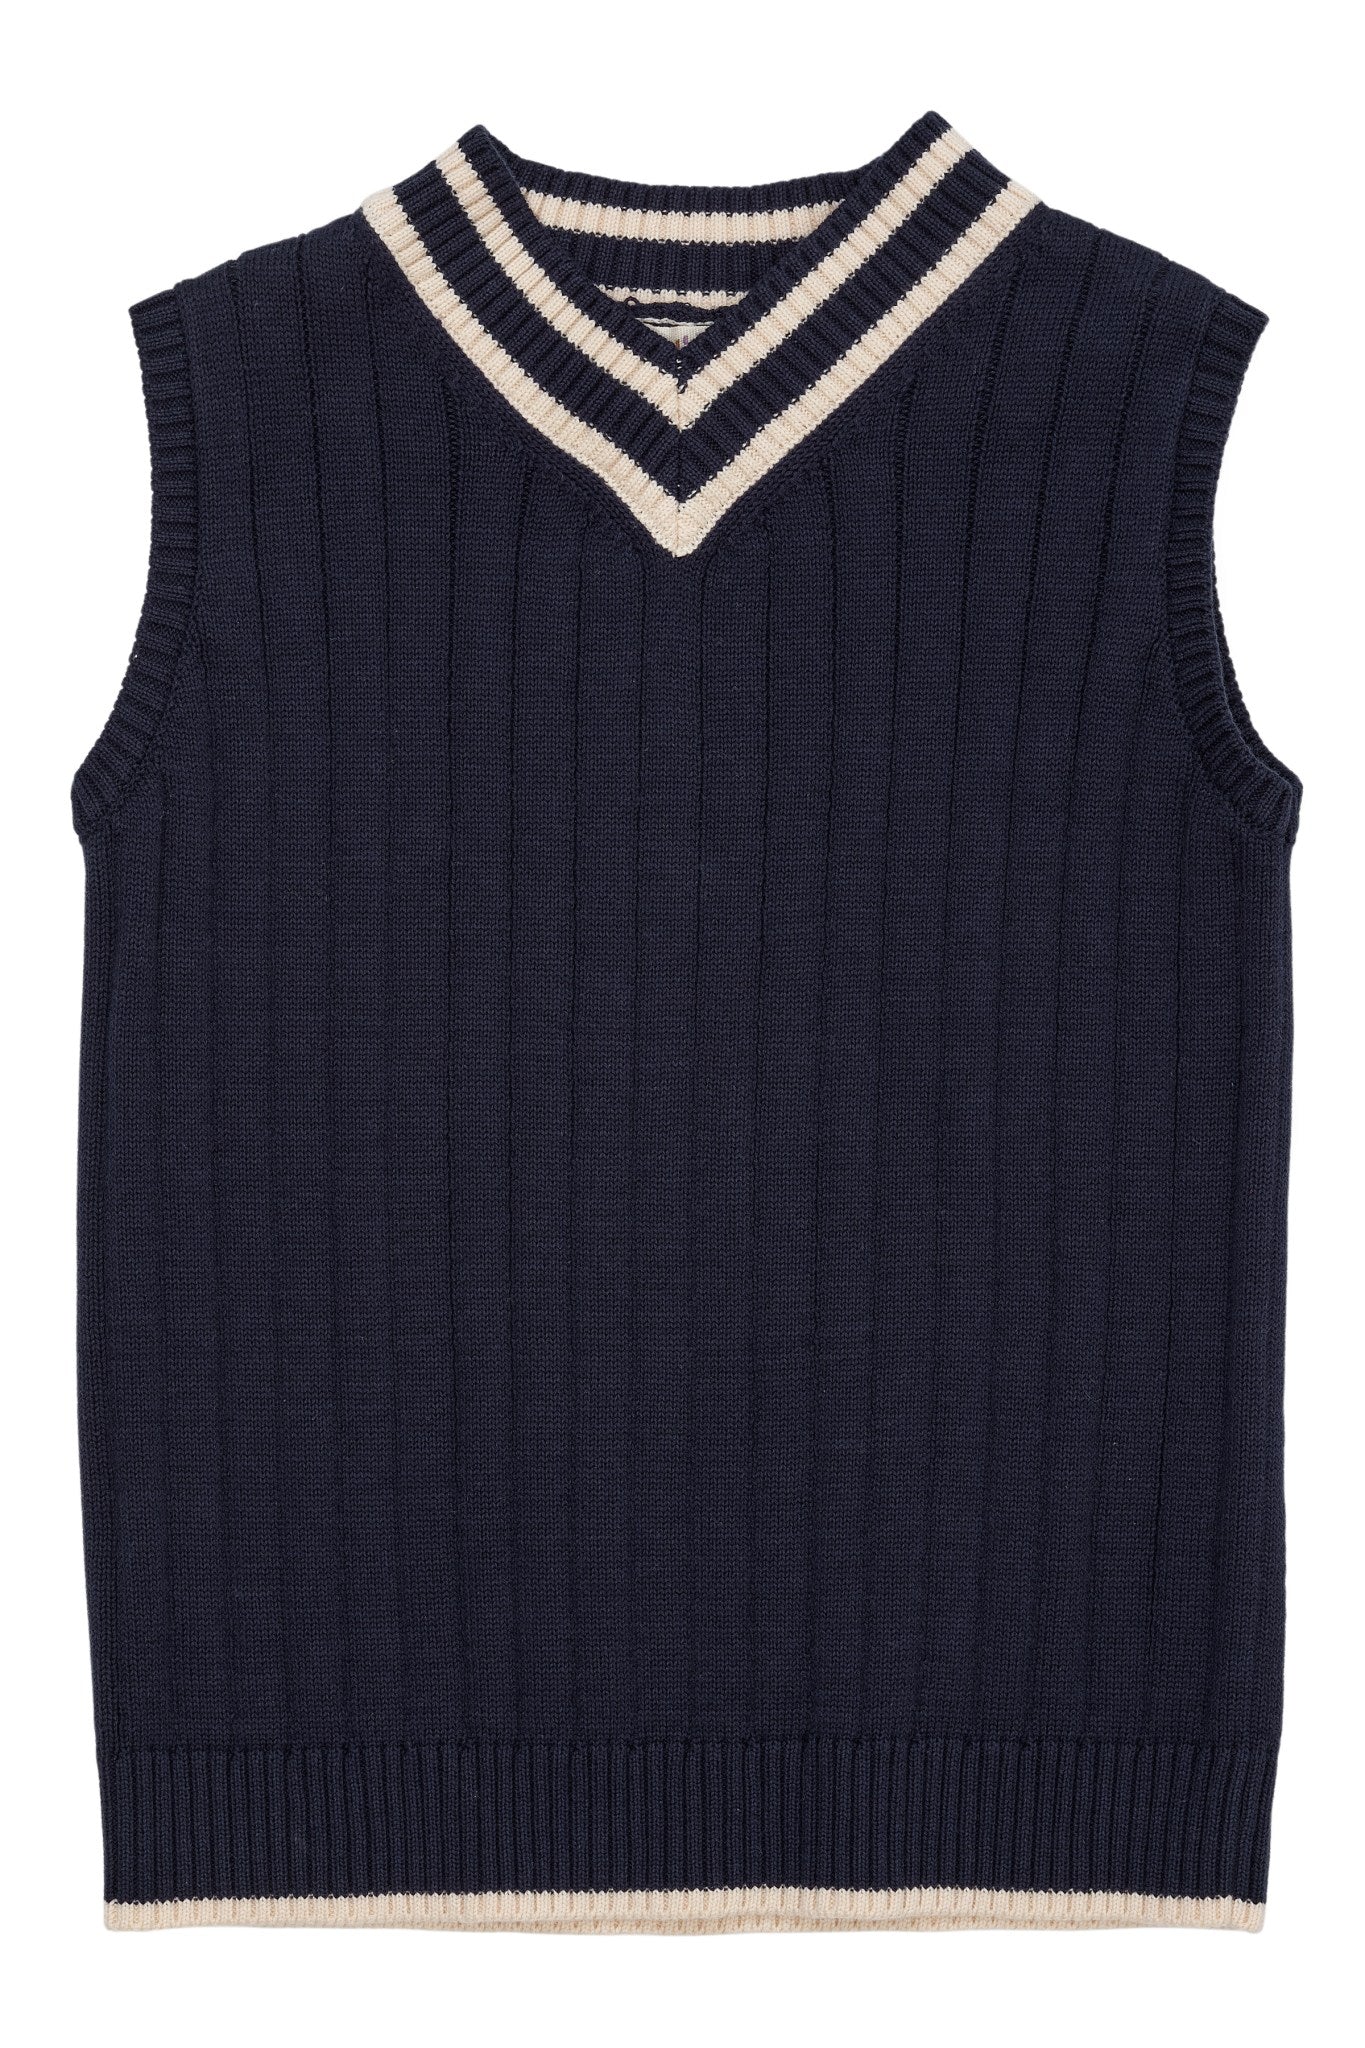 KNITTED VEST W. V NECK AND STRIPE - NAVY/CREAM COMB.